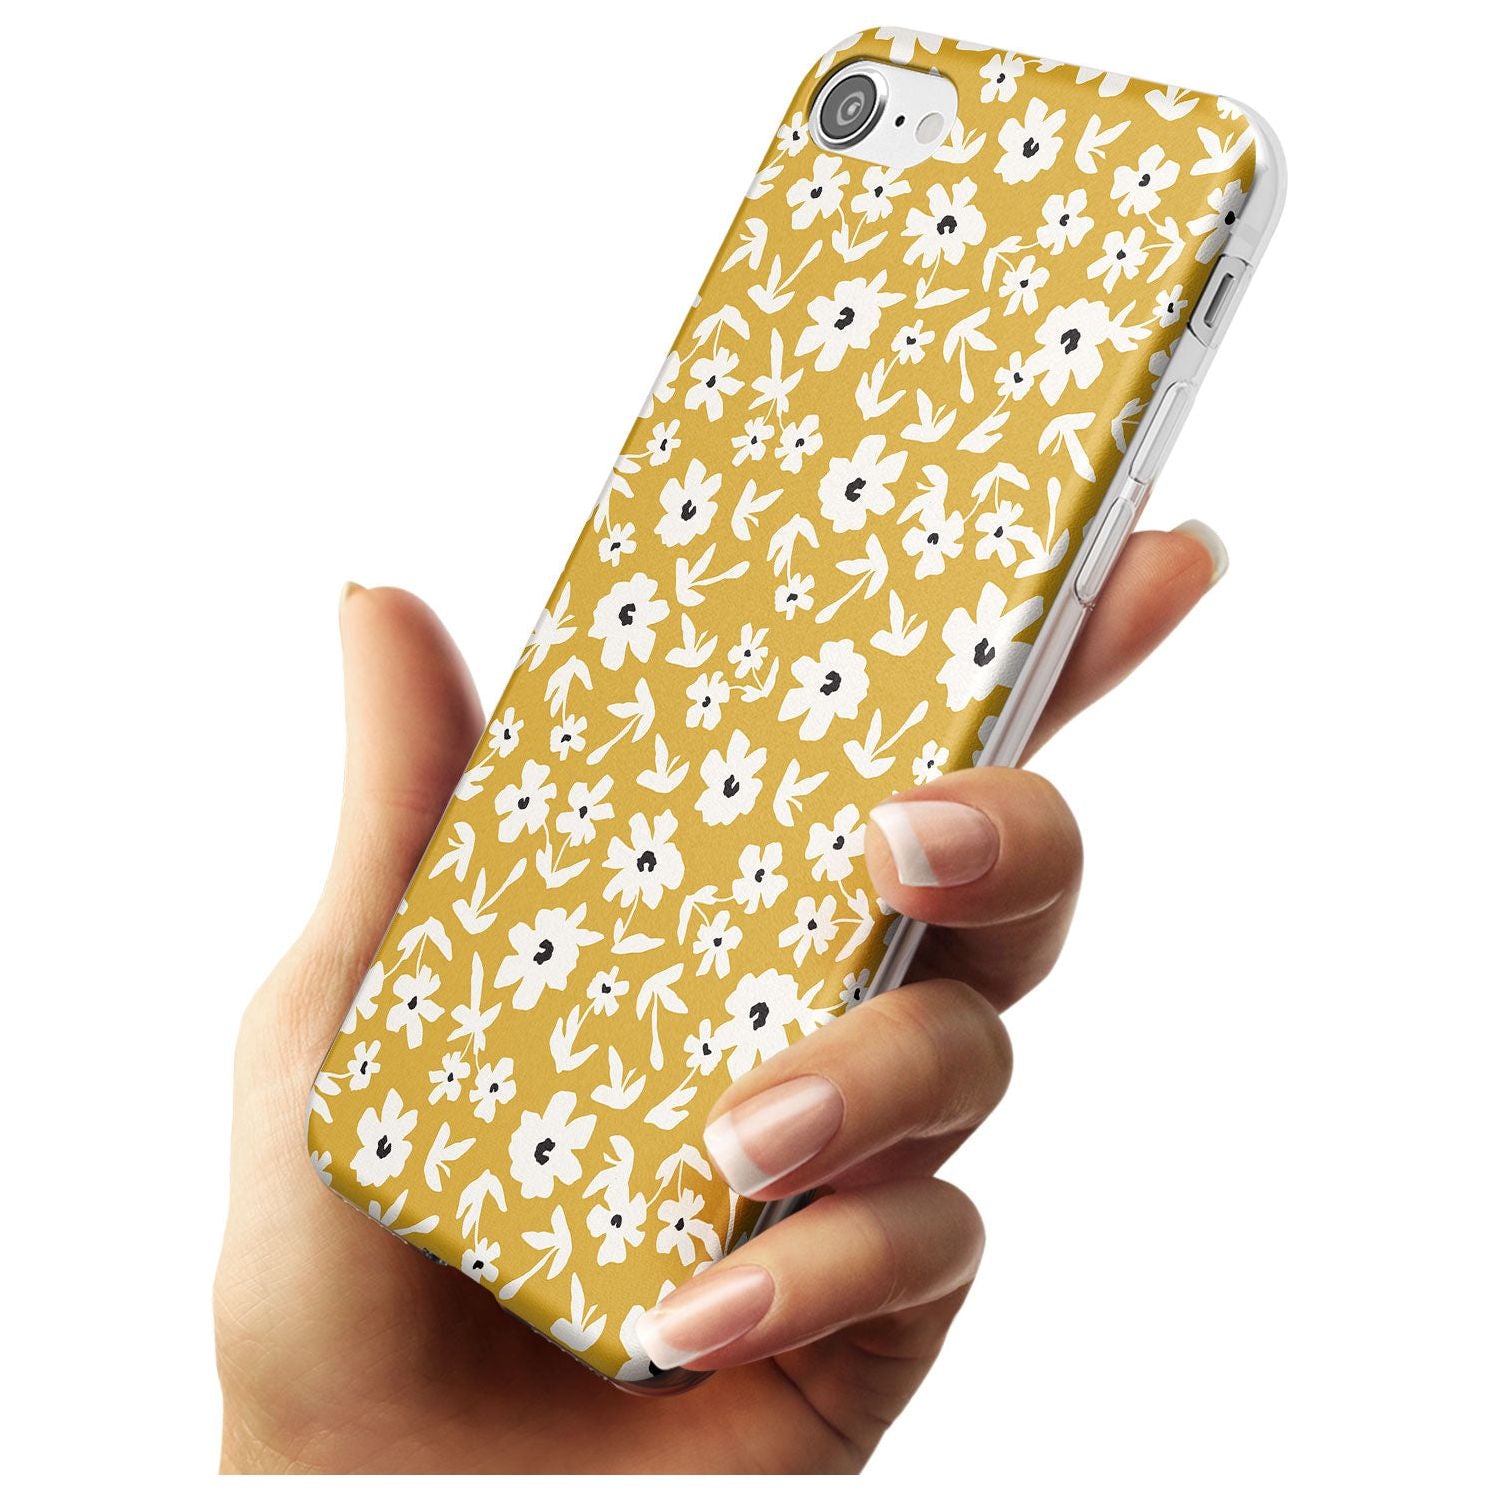 Floral Print on Mustard - Cute Floral Design Black Impact Phone Case for iPhone SE 8 7 Plus